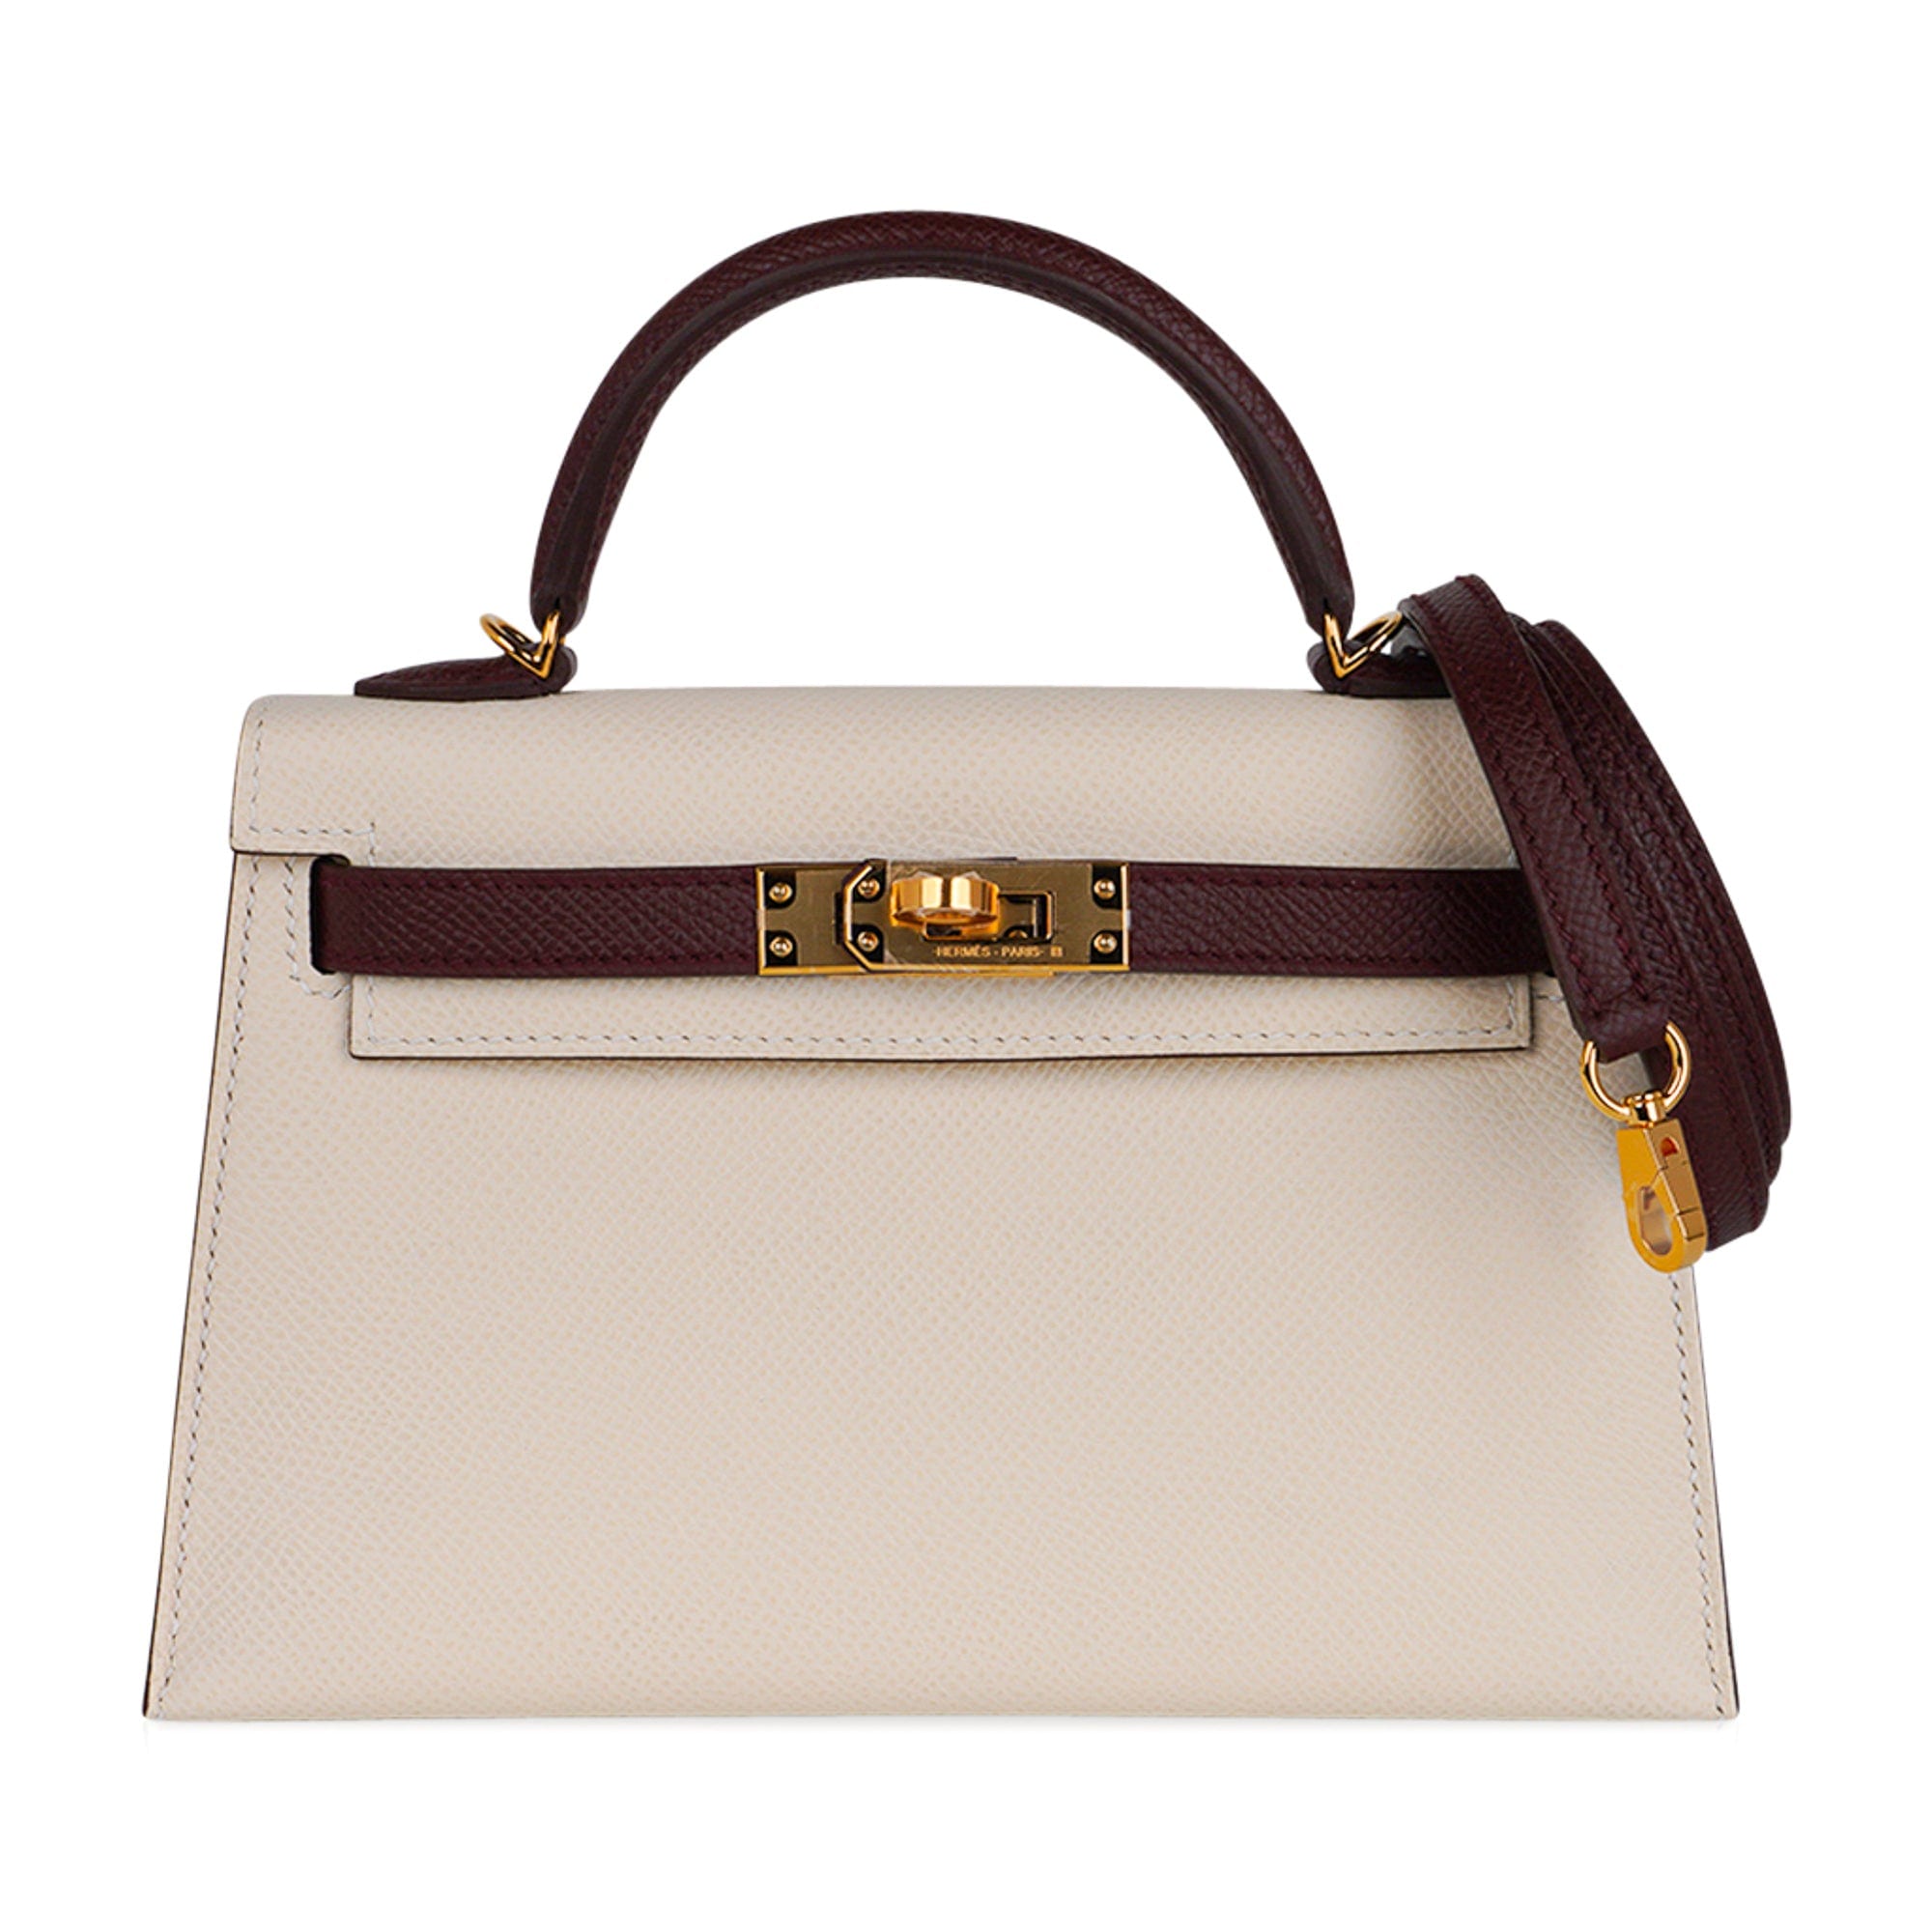 Hermes Special Order HSS Mini Kelly 20 Sellier Bag in Nata and